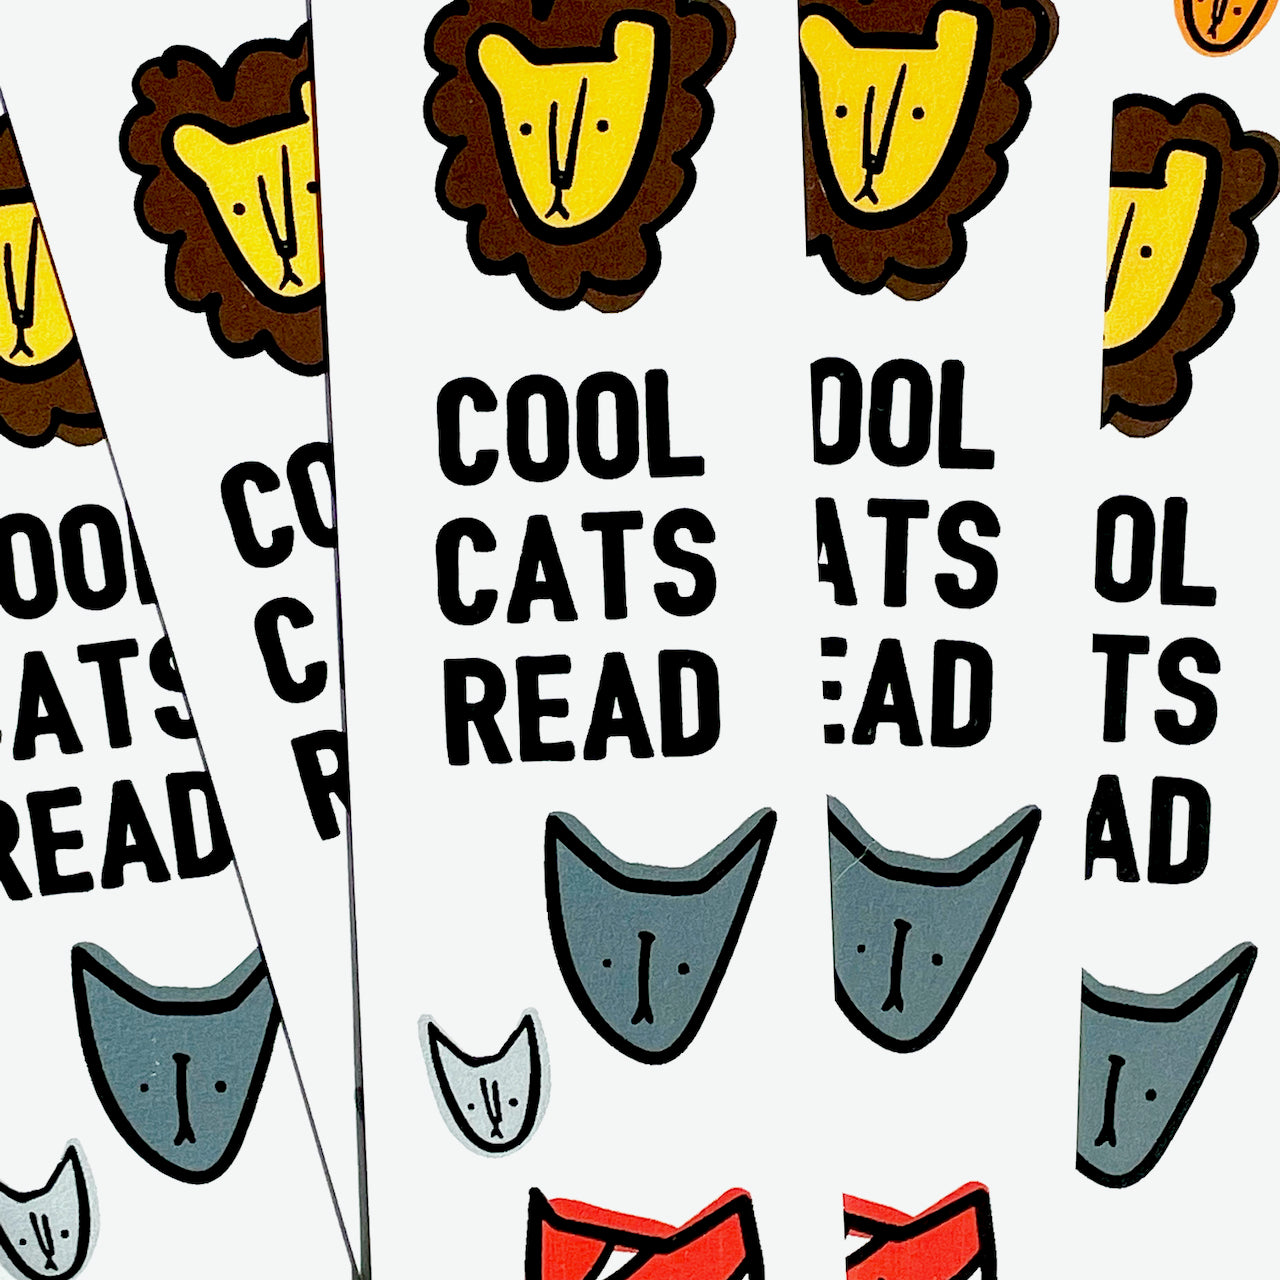 COOL CATS READ BOOKMARK